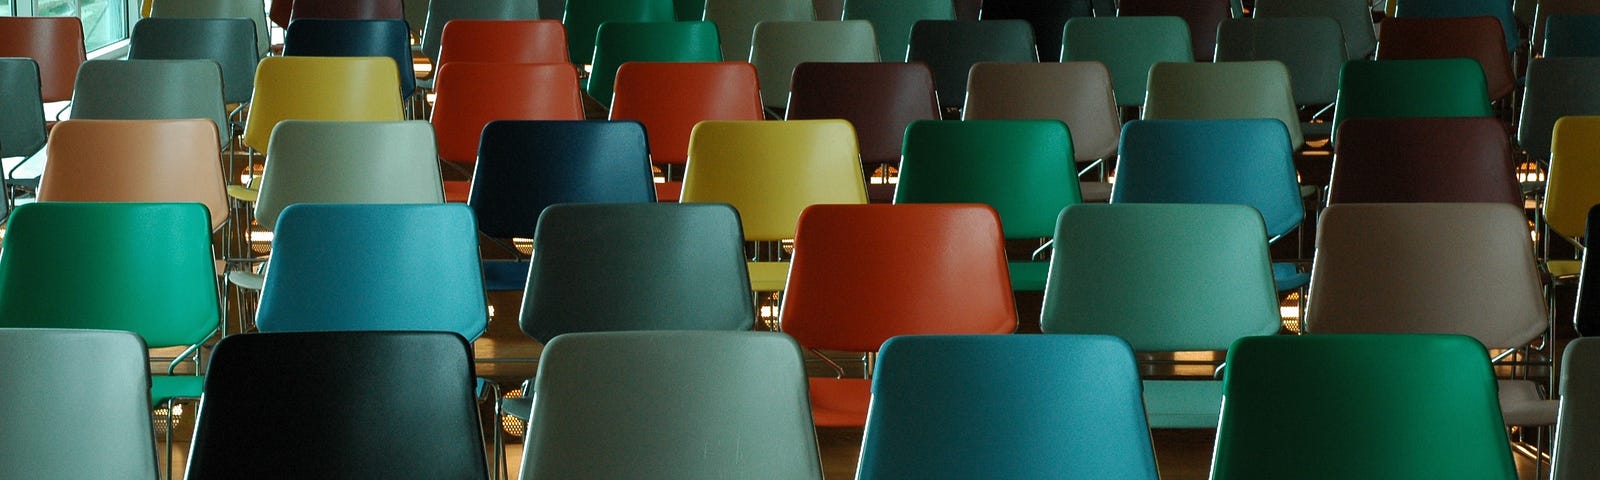 Empty lecture hall with many colorful chairs